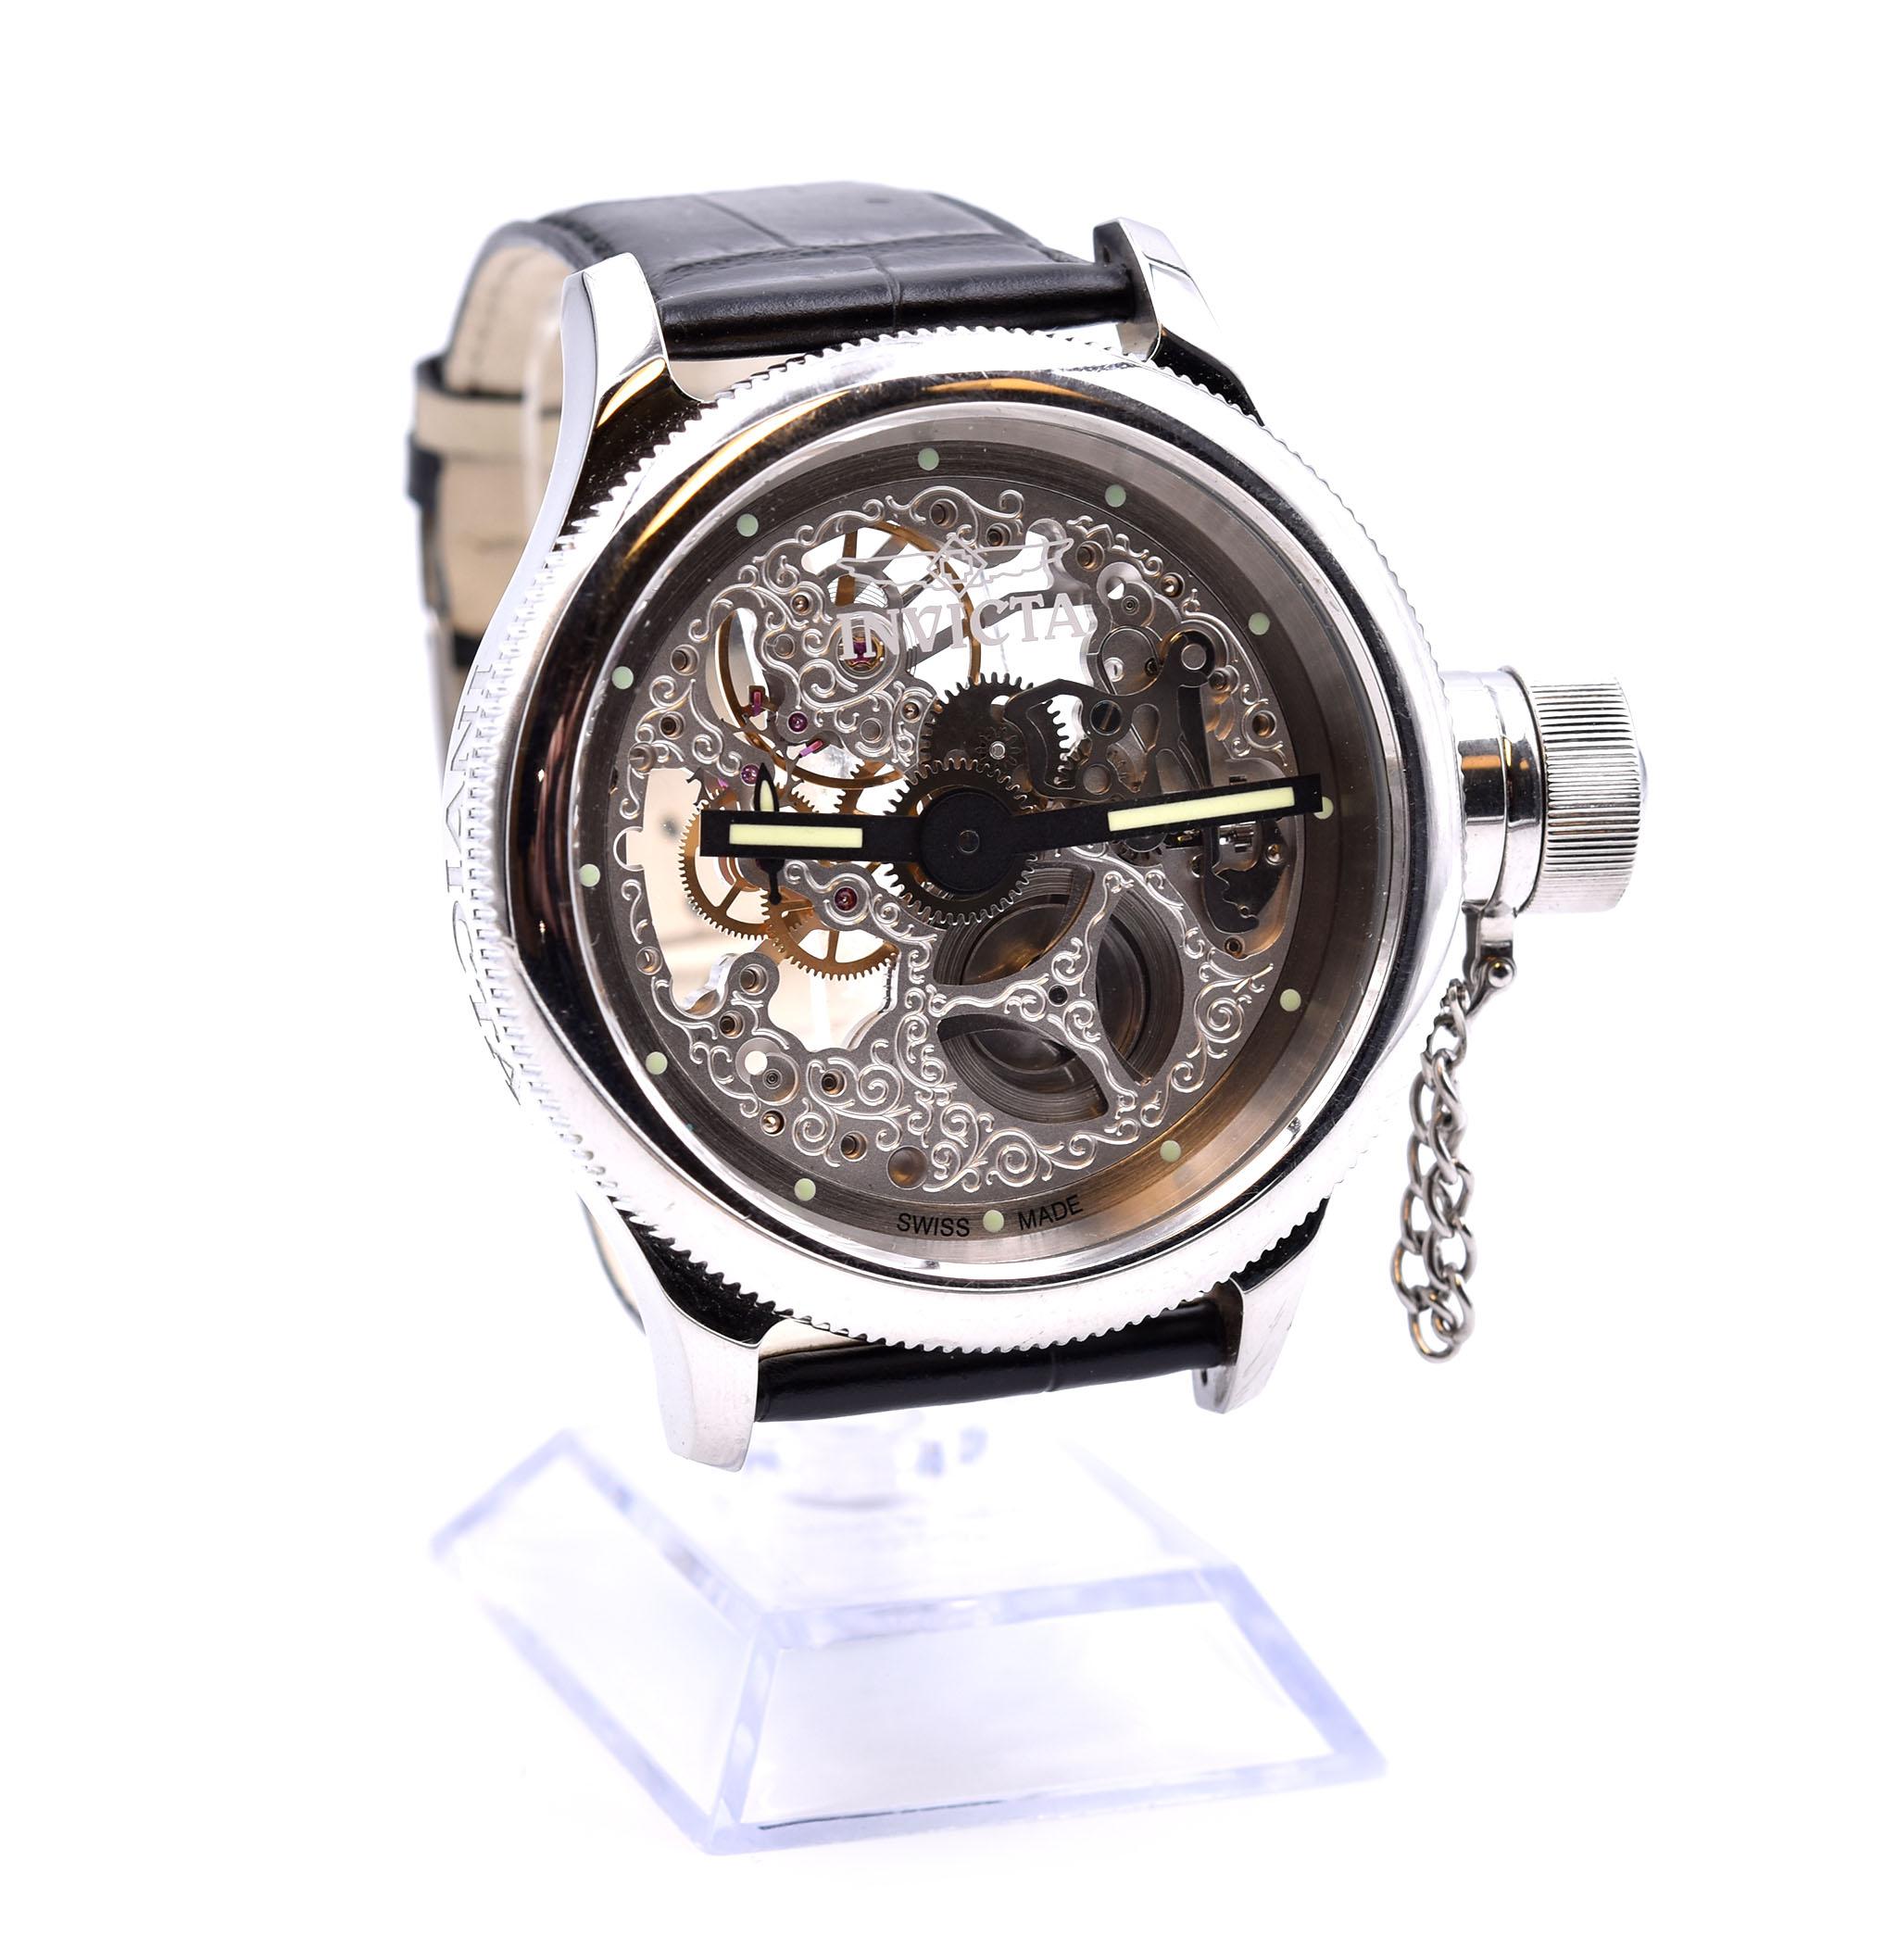 Movement: mechanical 
Function: hours, minutes
Case: 51.5mm stainless steel case, flame fusion crystal, exhibition case back
Dial: silver skeleton dial with luminescent hour markers and hands
Band: black alligator print on leather strap, tang